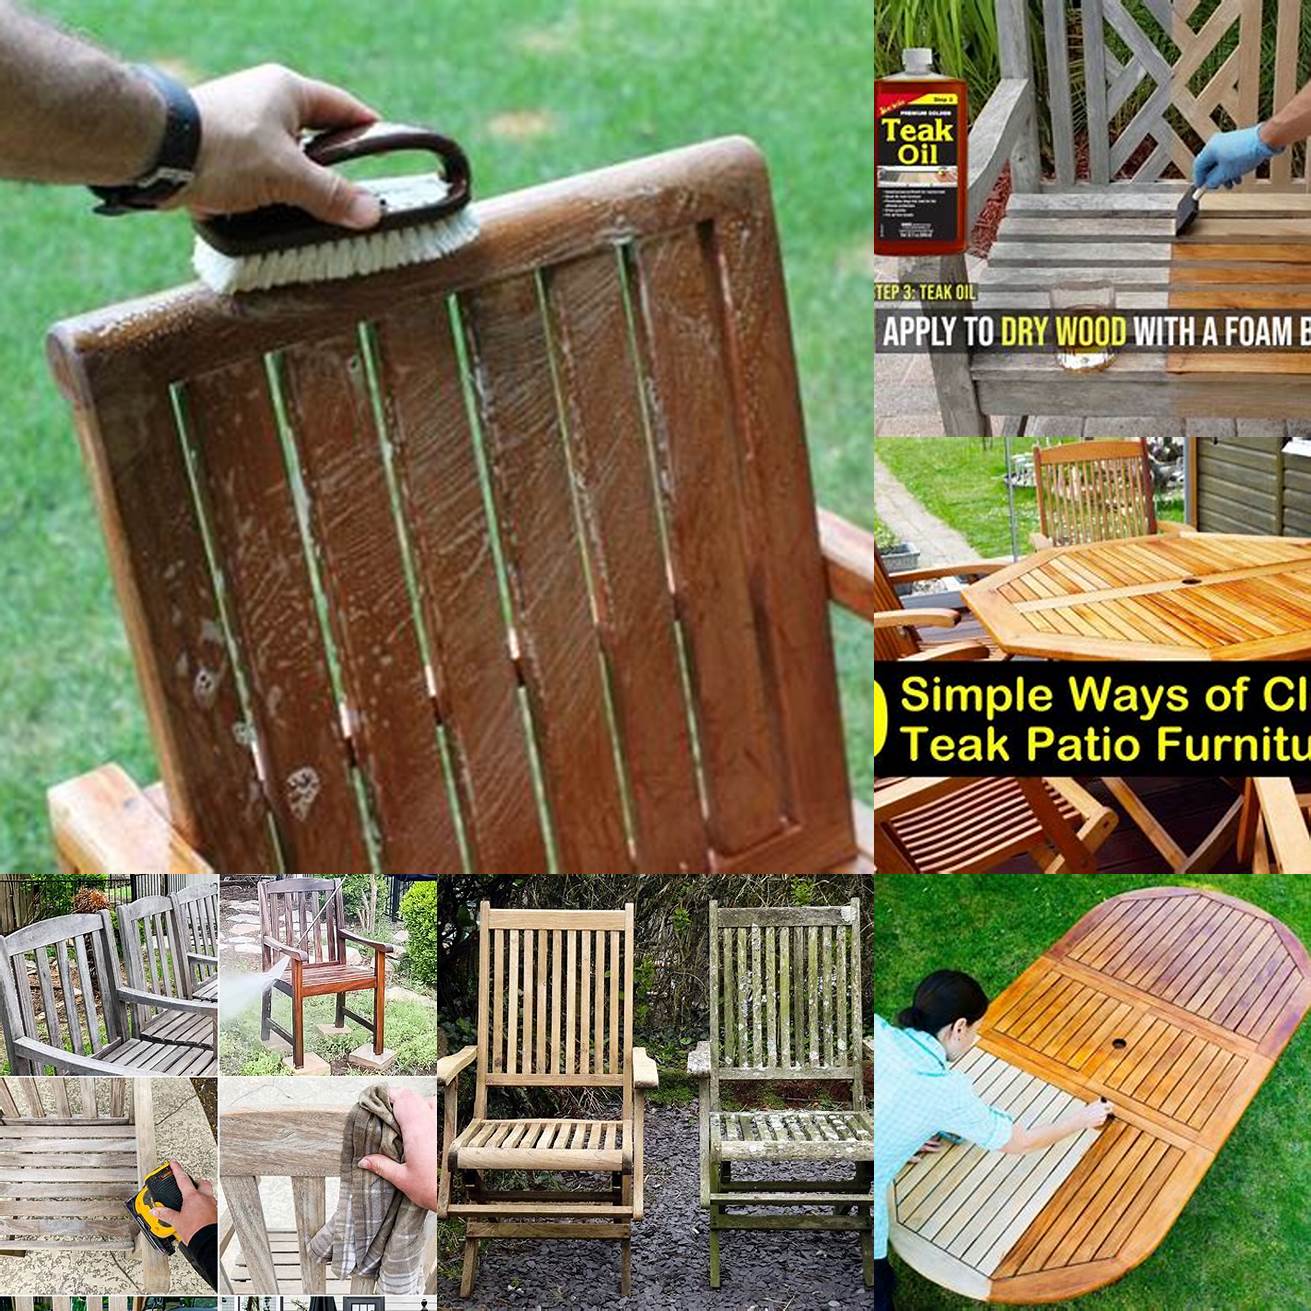 Steps on how to clean teak outdoor furniture